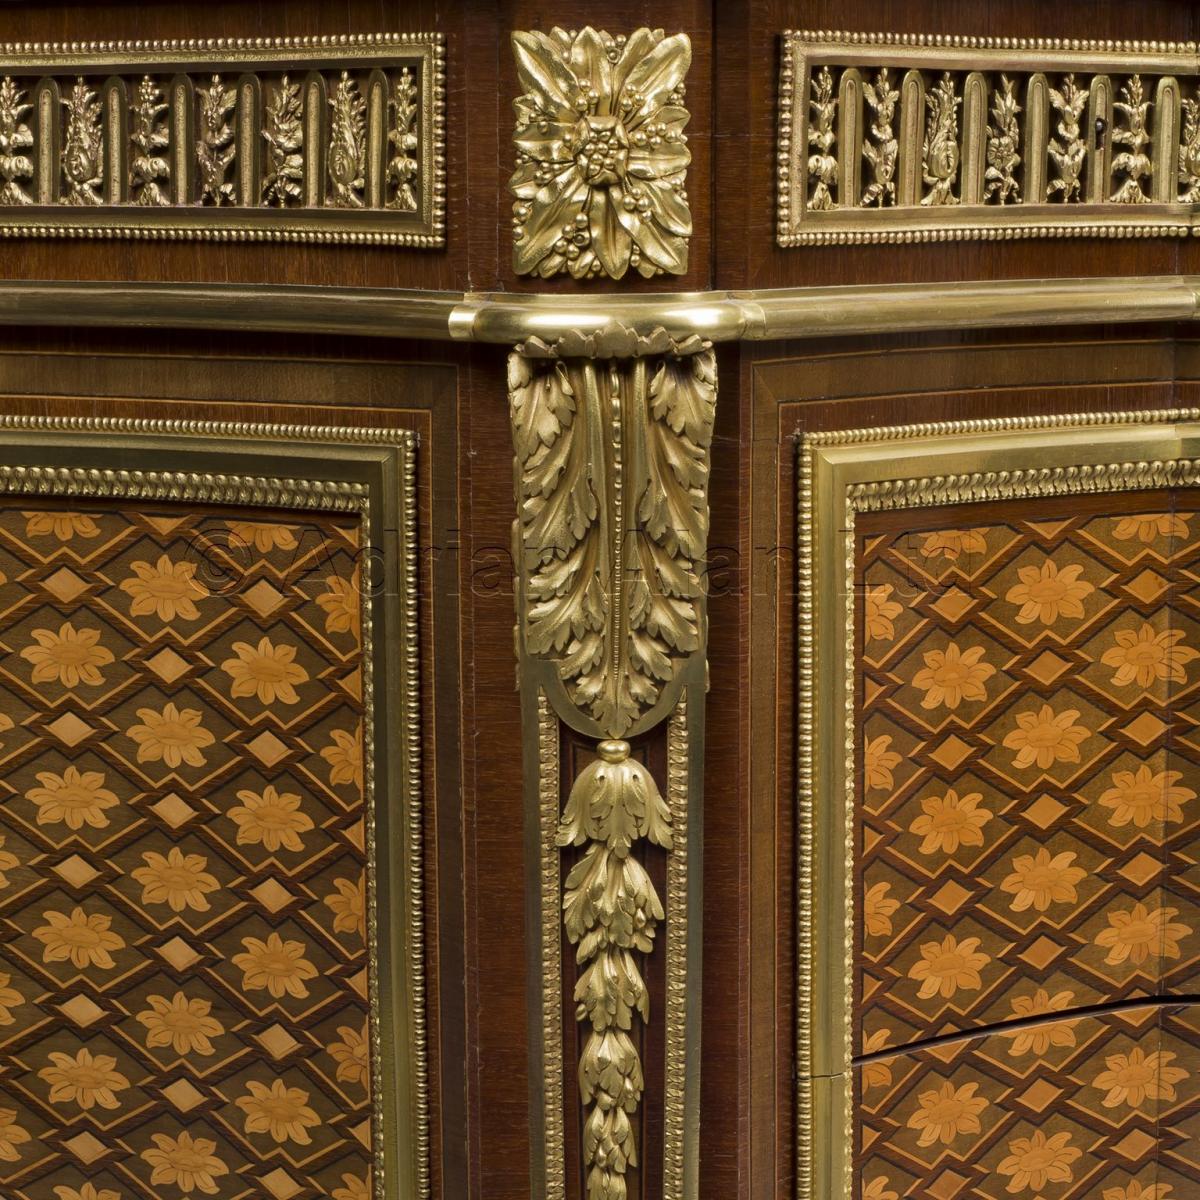 A Louis XVI Style Marquetry Commode after a model by Jean-Henri Riesener, by François Linke